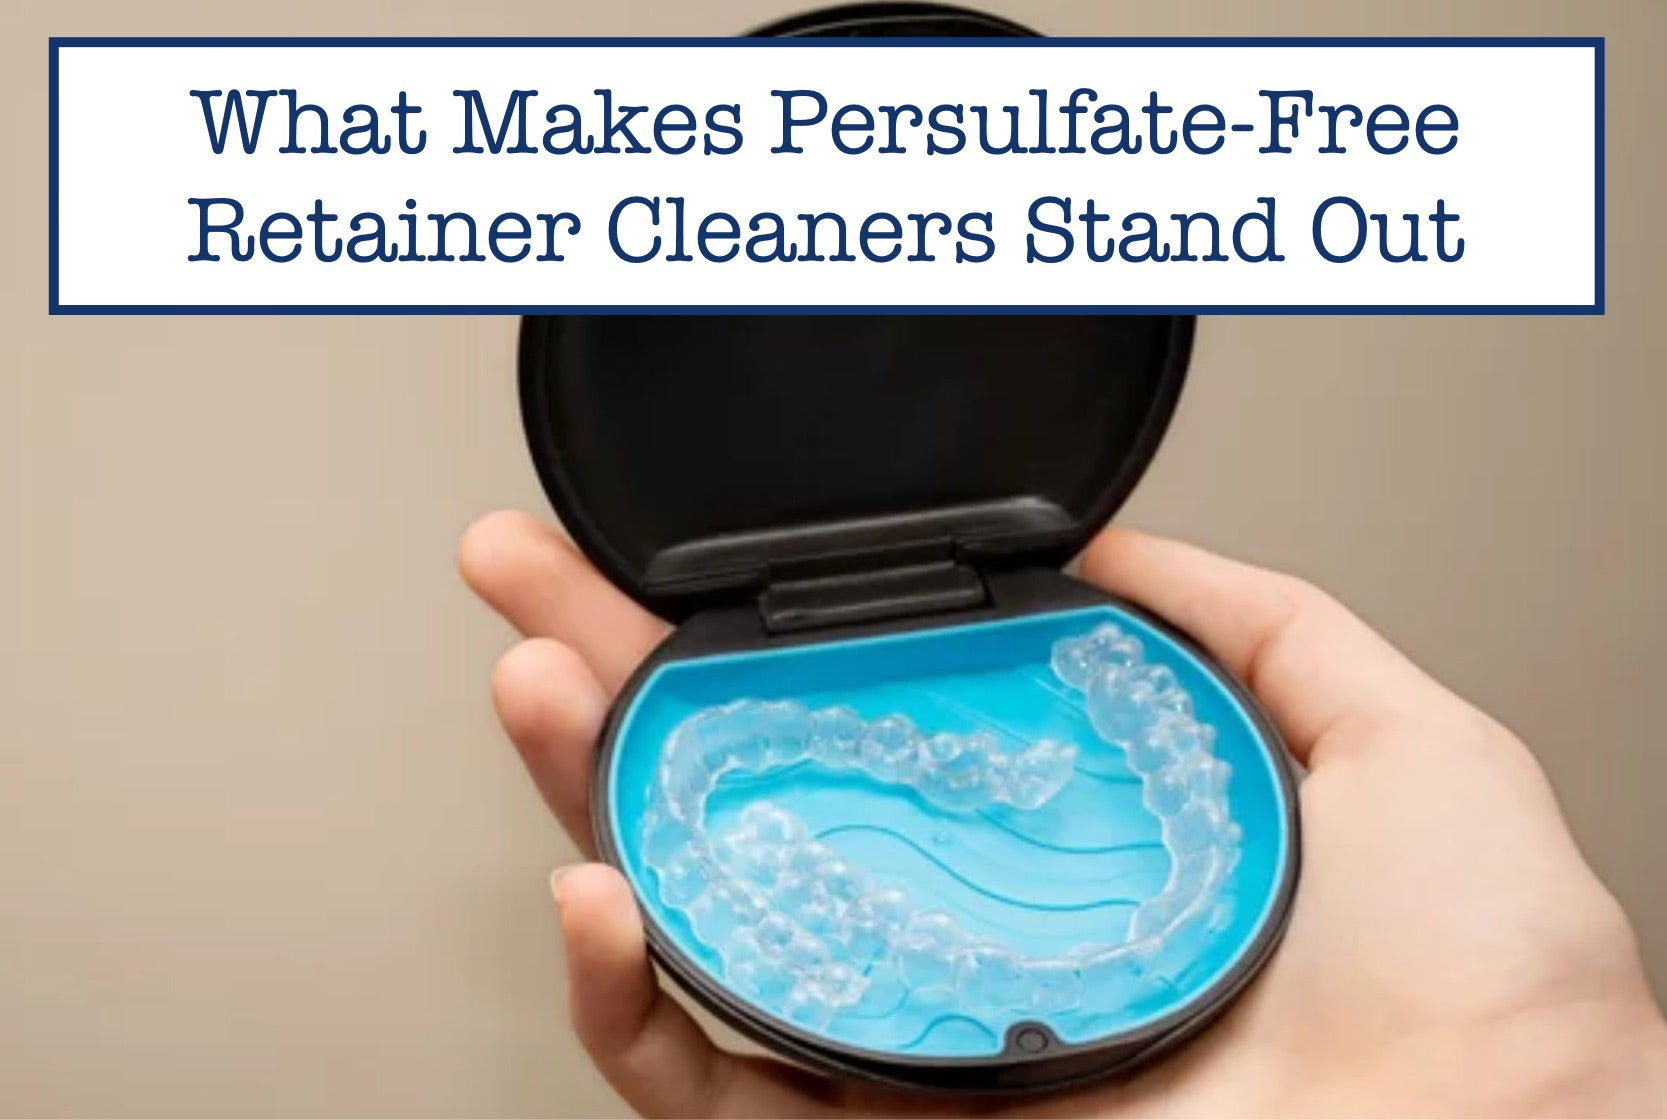 What Makes Persulfate-Free Retainer Cleaners Stand Out